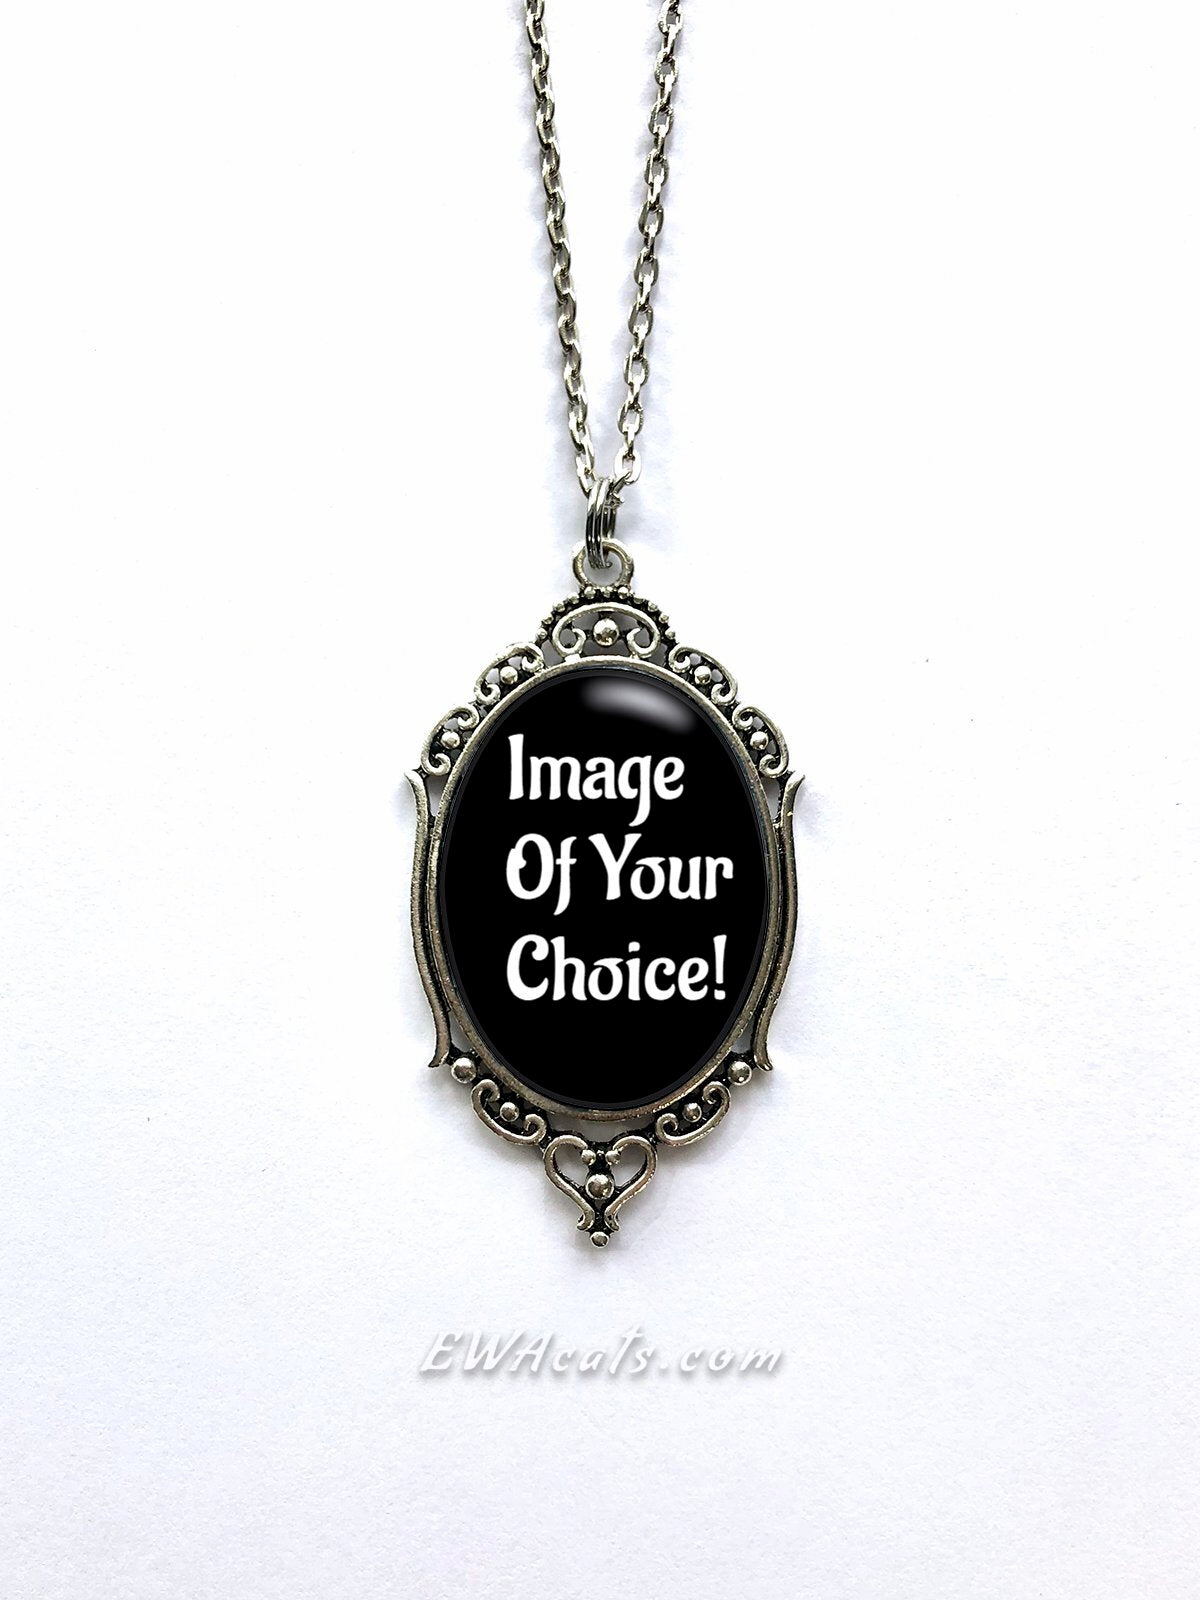 Necklace, Image OF YOUR CHOICE! See Directions below